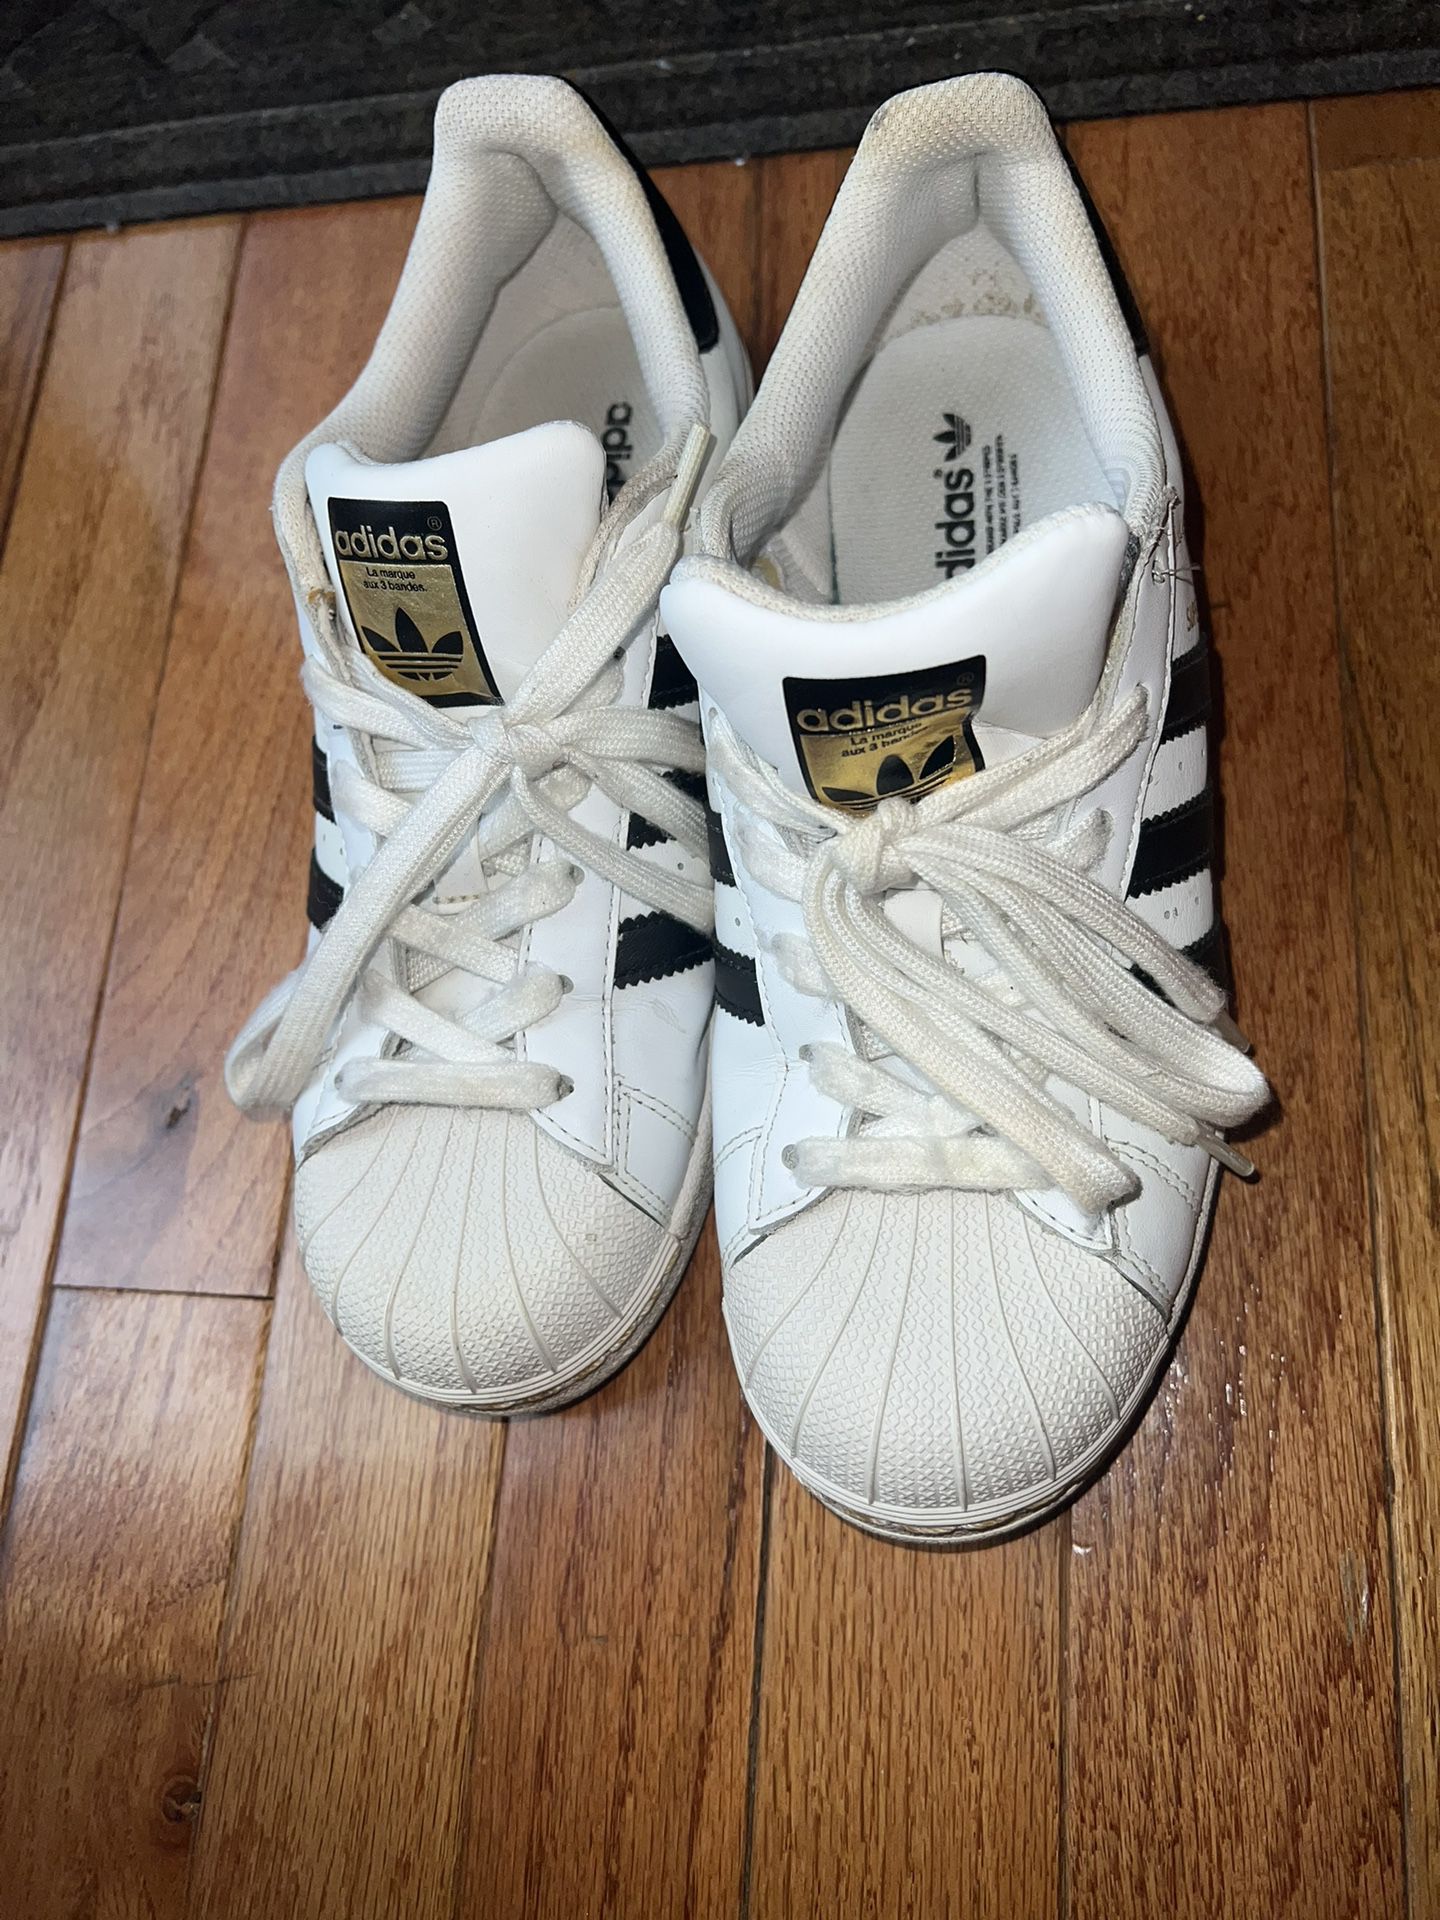 Classic Adidas Superstar Sneakers in Black & White with Gold Accents